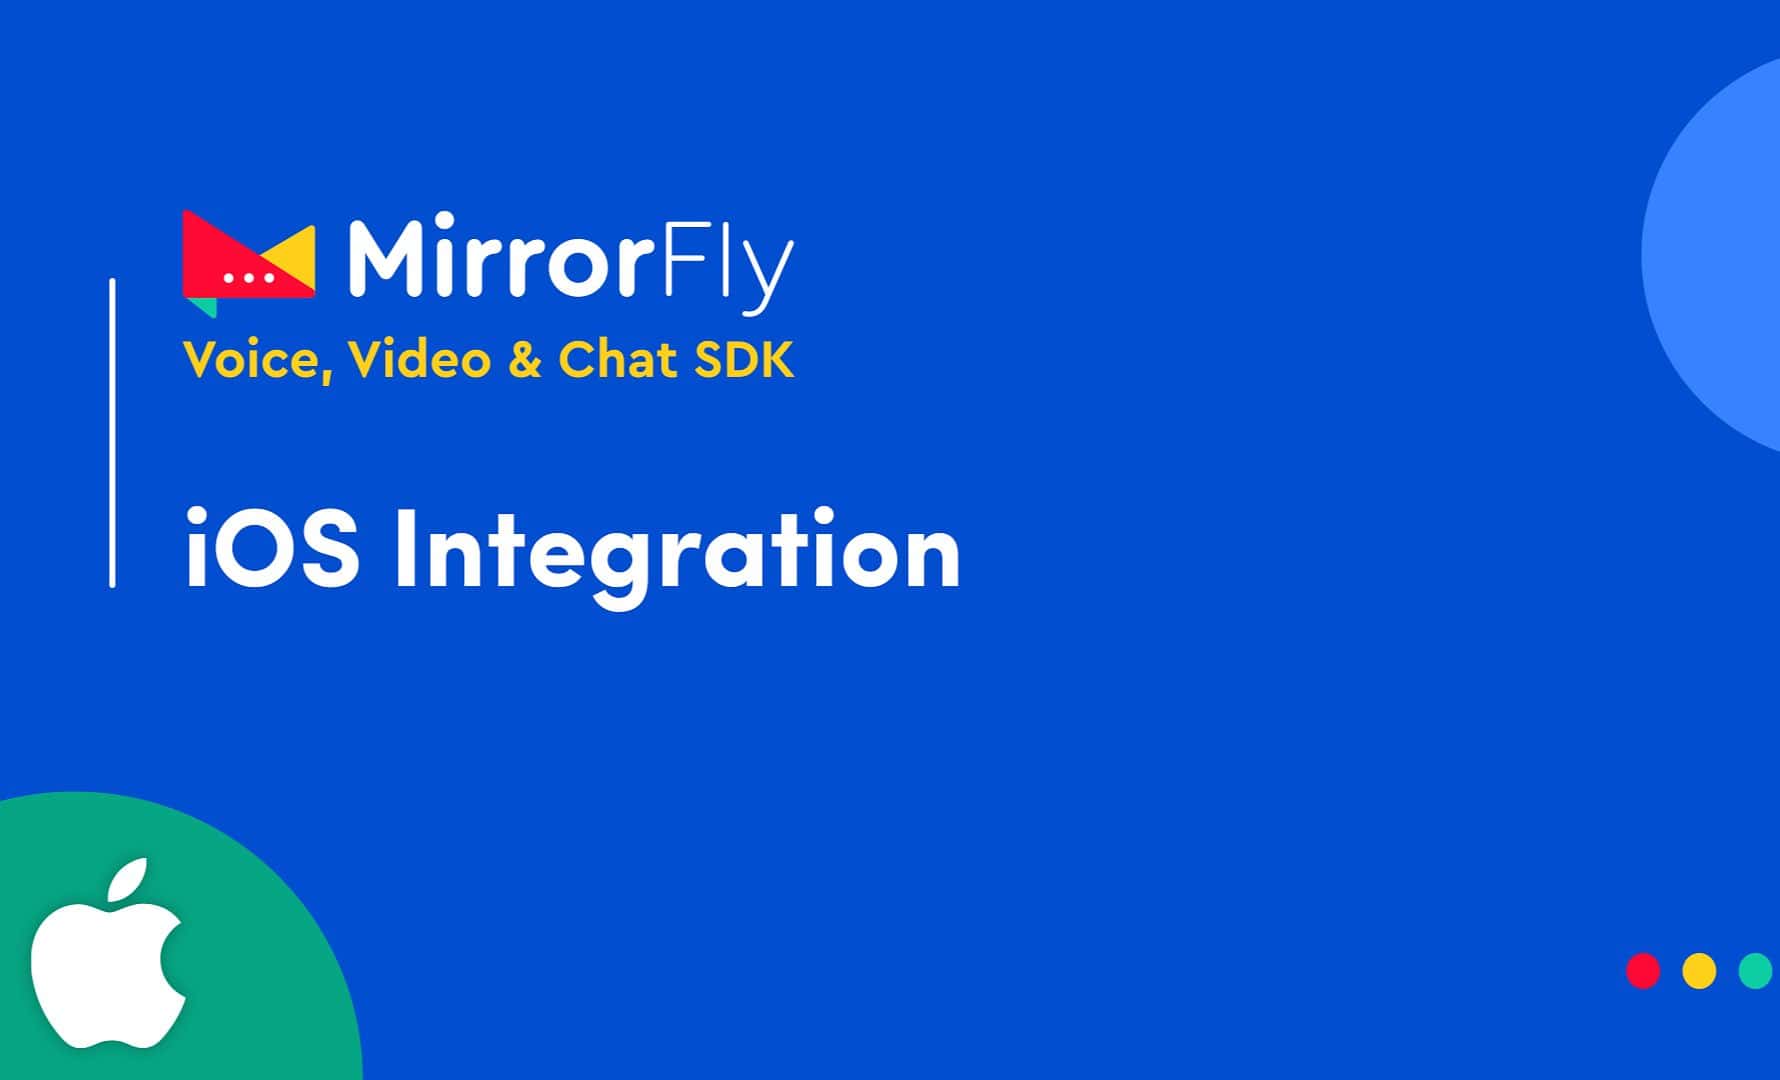 Build Voice, Video and Chat using MirrorFly SDK for iOS